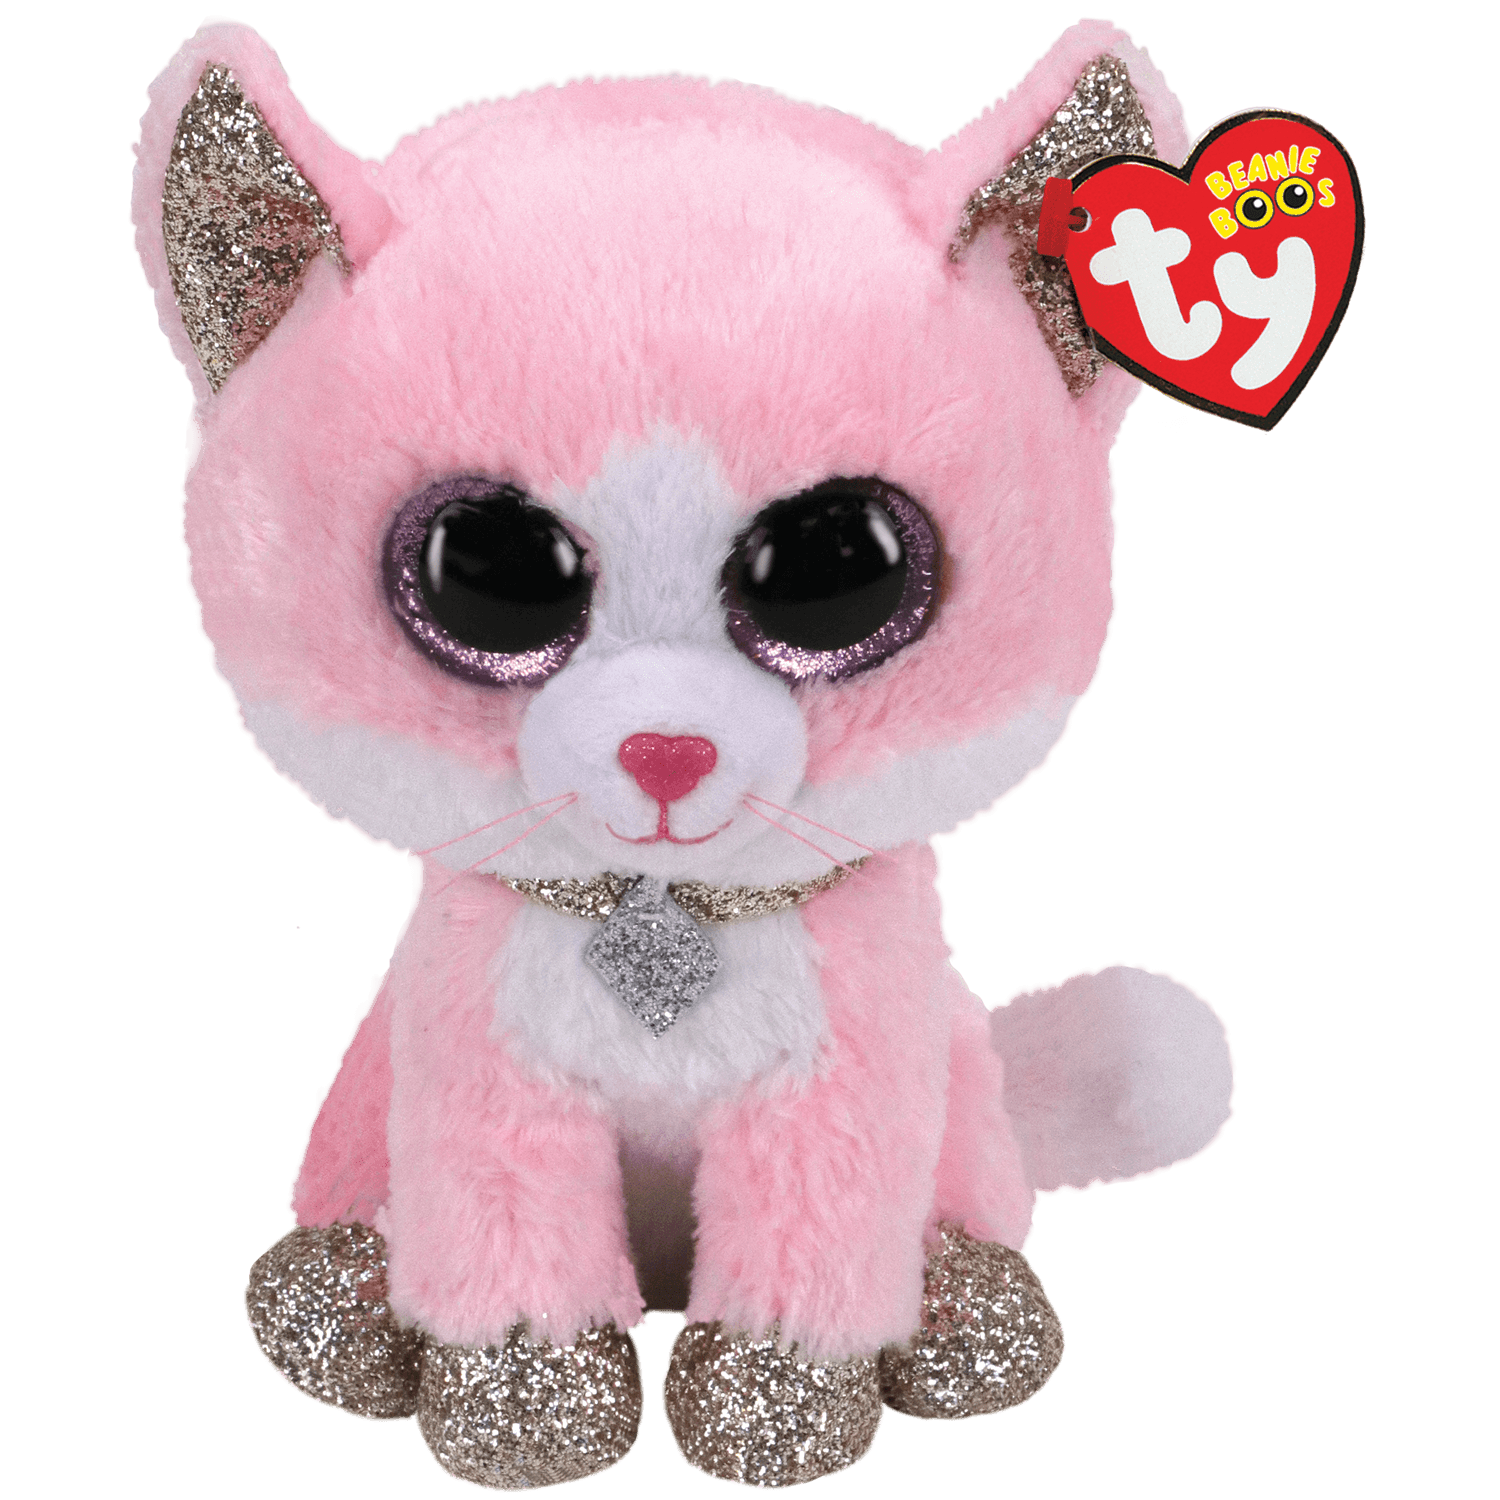 TY Beanie Boos - FIONA the Pink Cat 6"